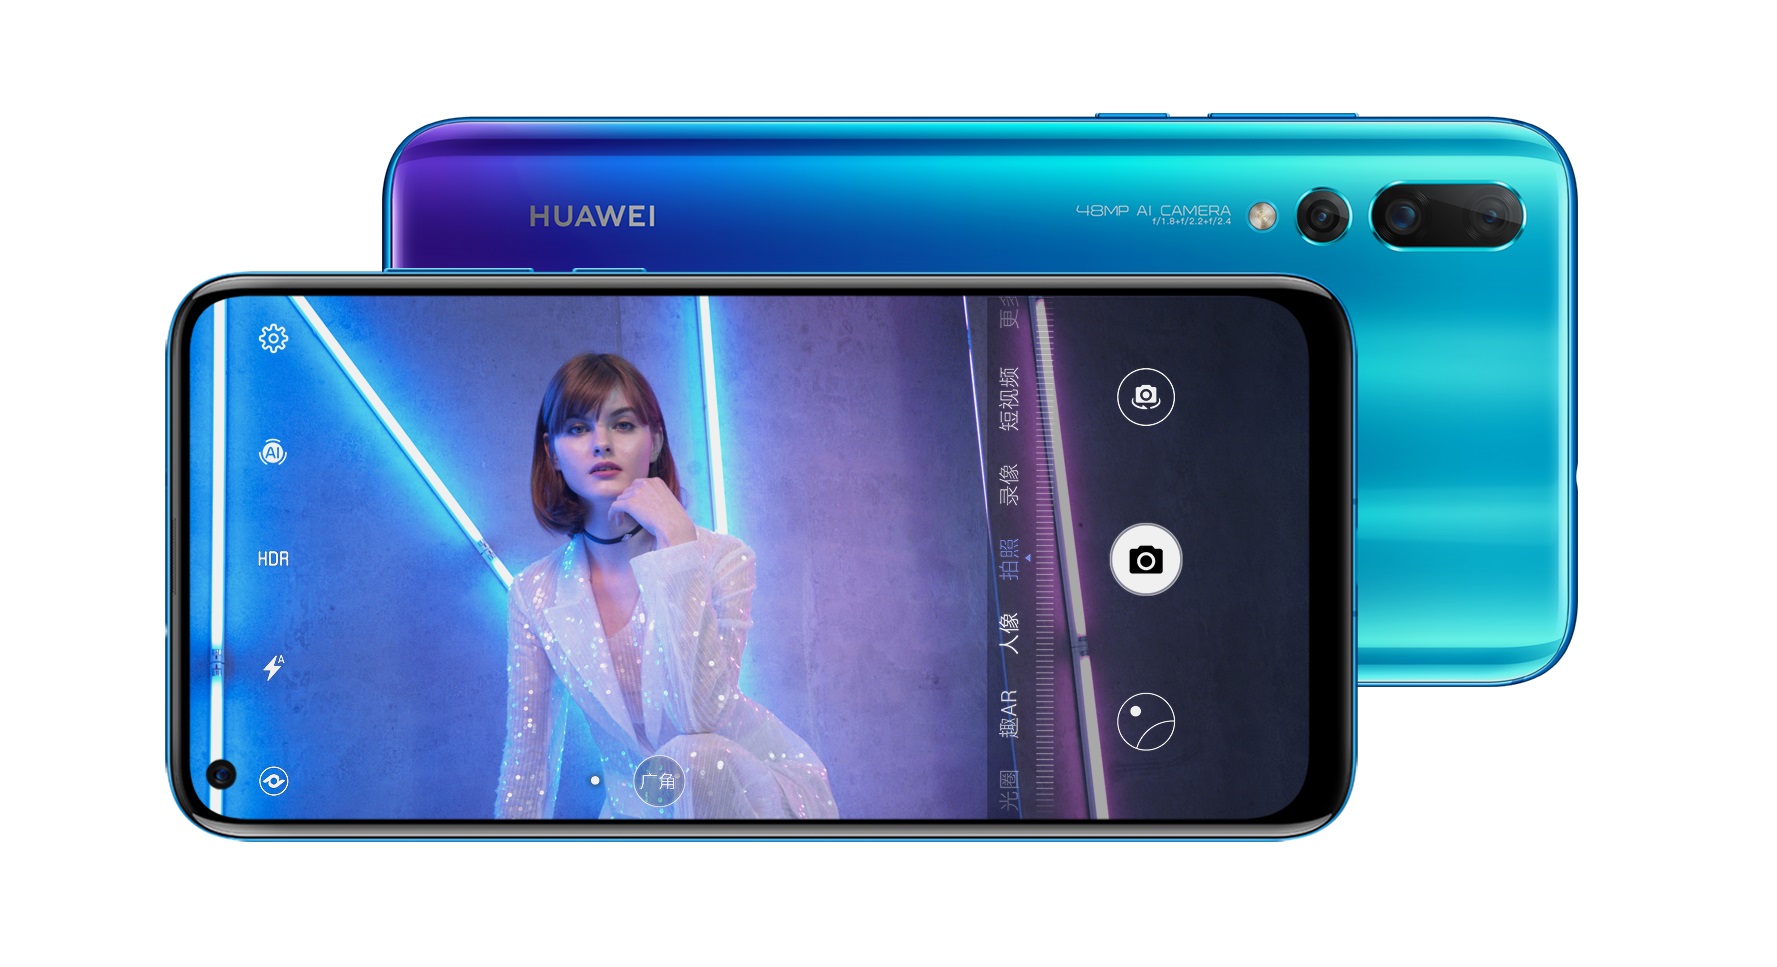 The Huawei Nova 4 smartphone from the front and behind.